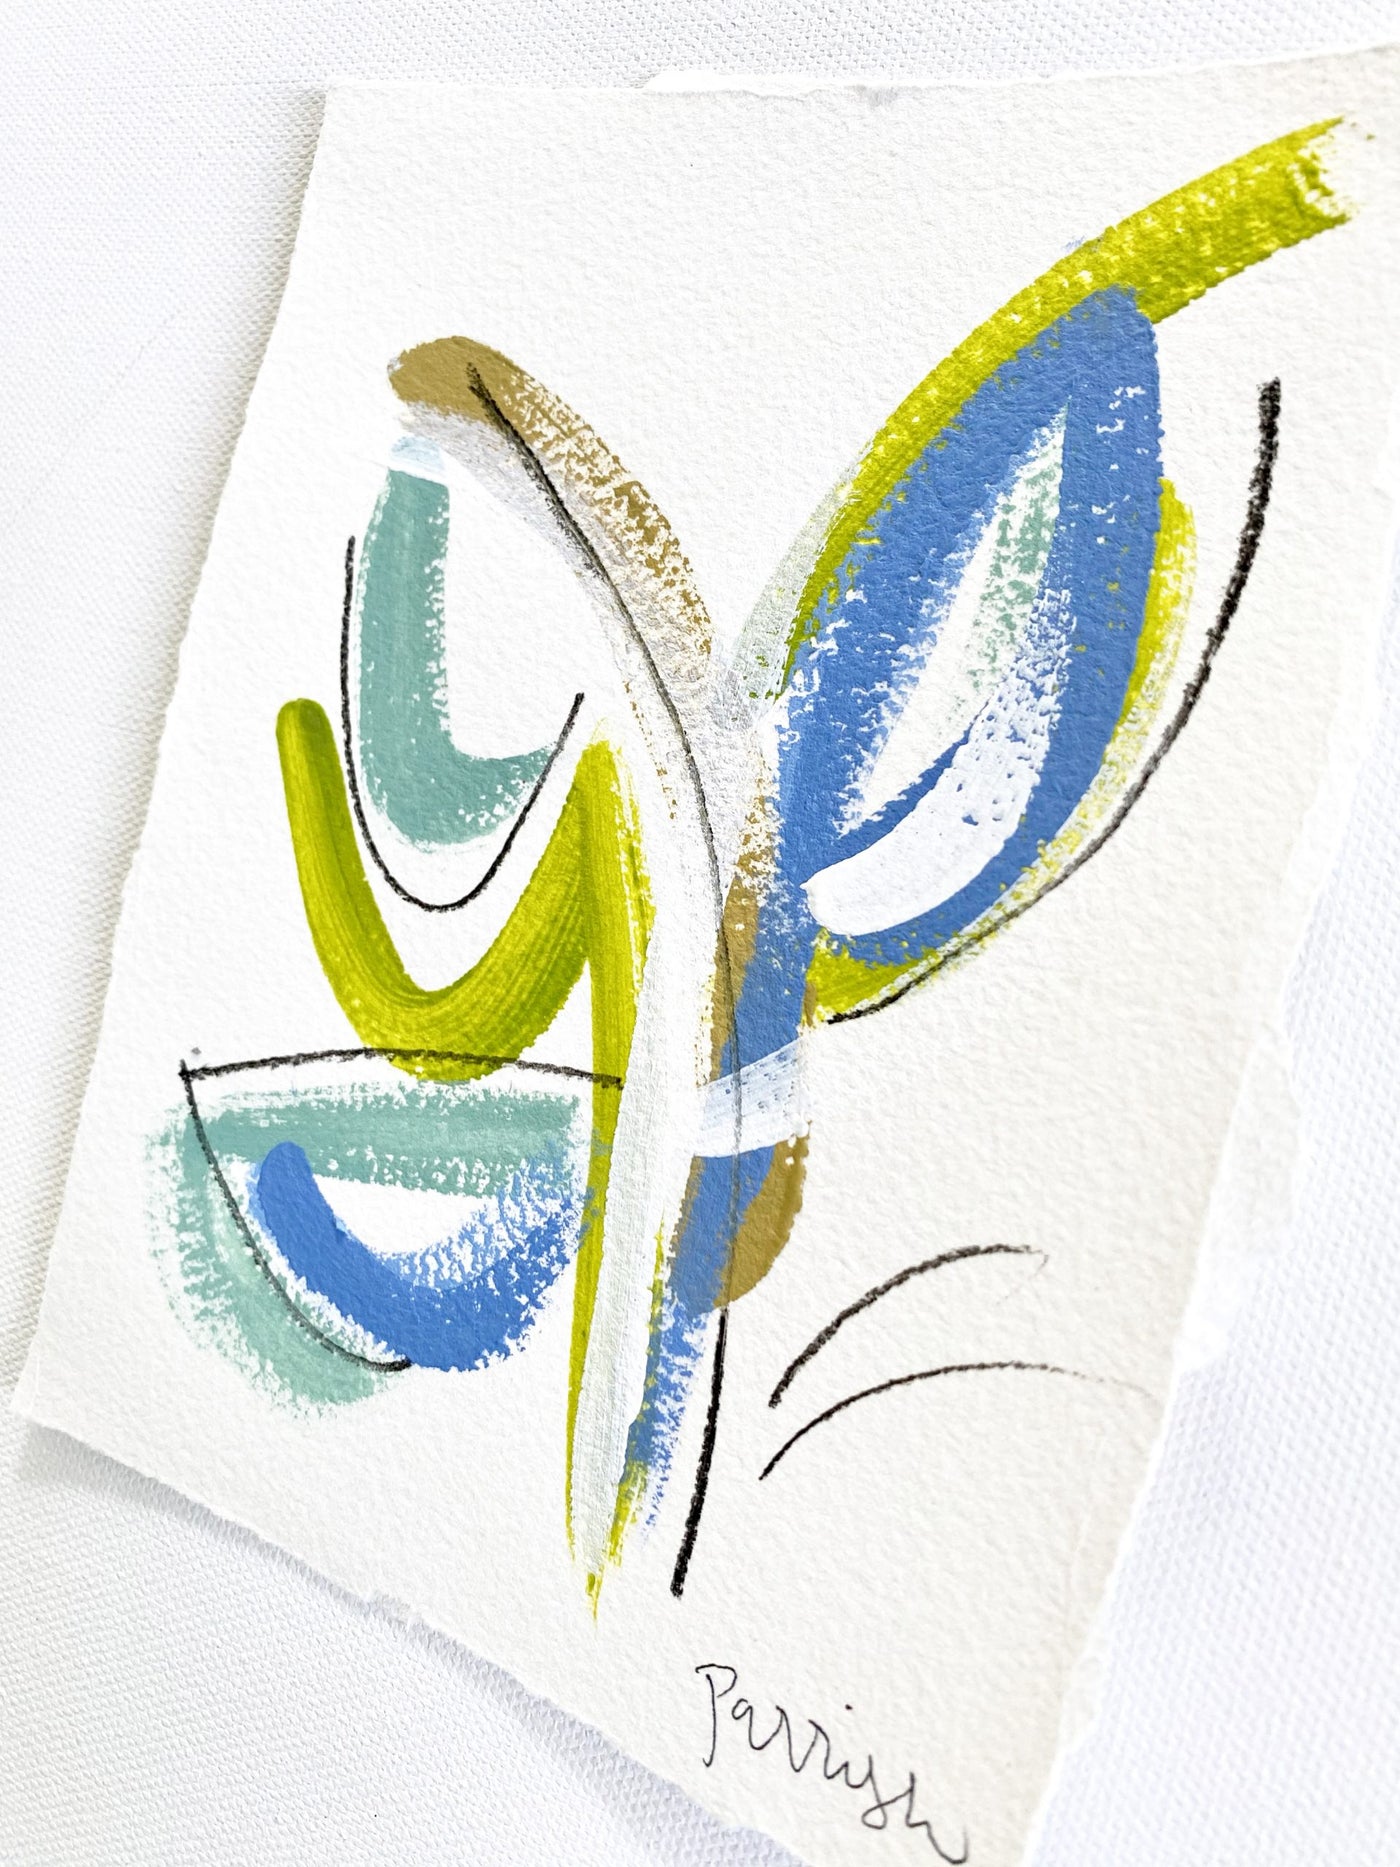 Refresh 2 - 5x7" (available through The Scouted Studio, Charleston)